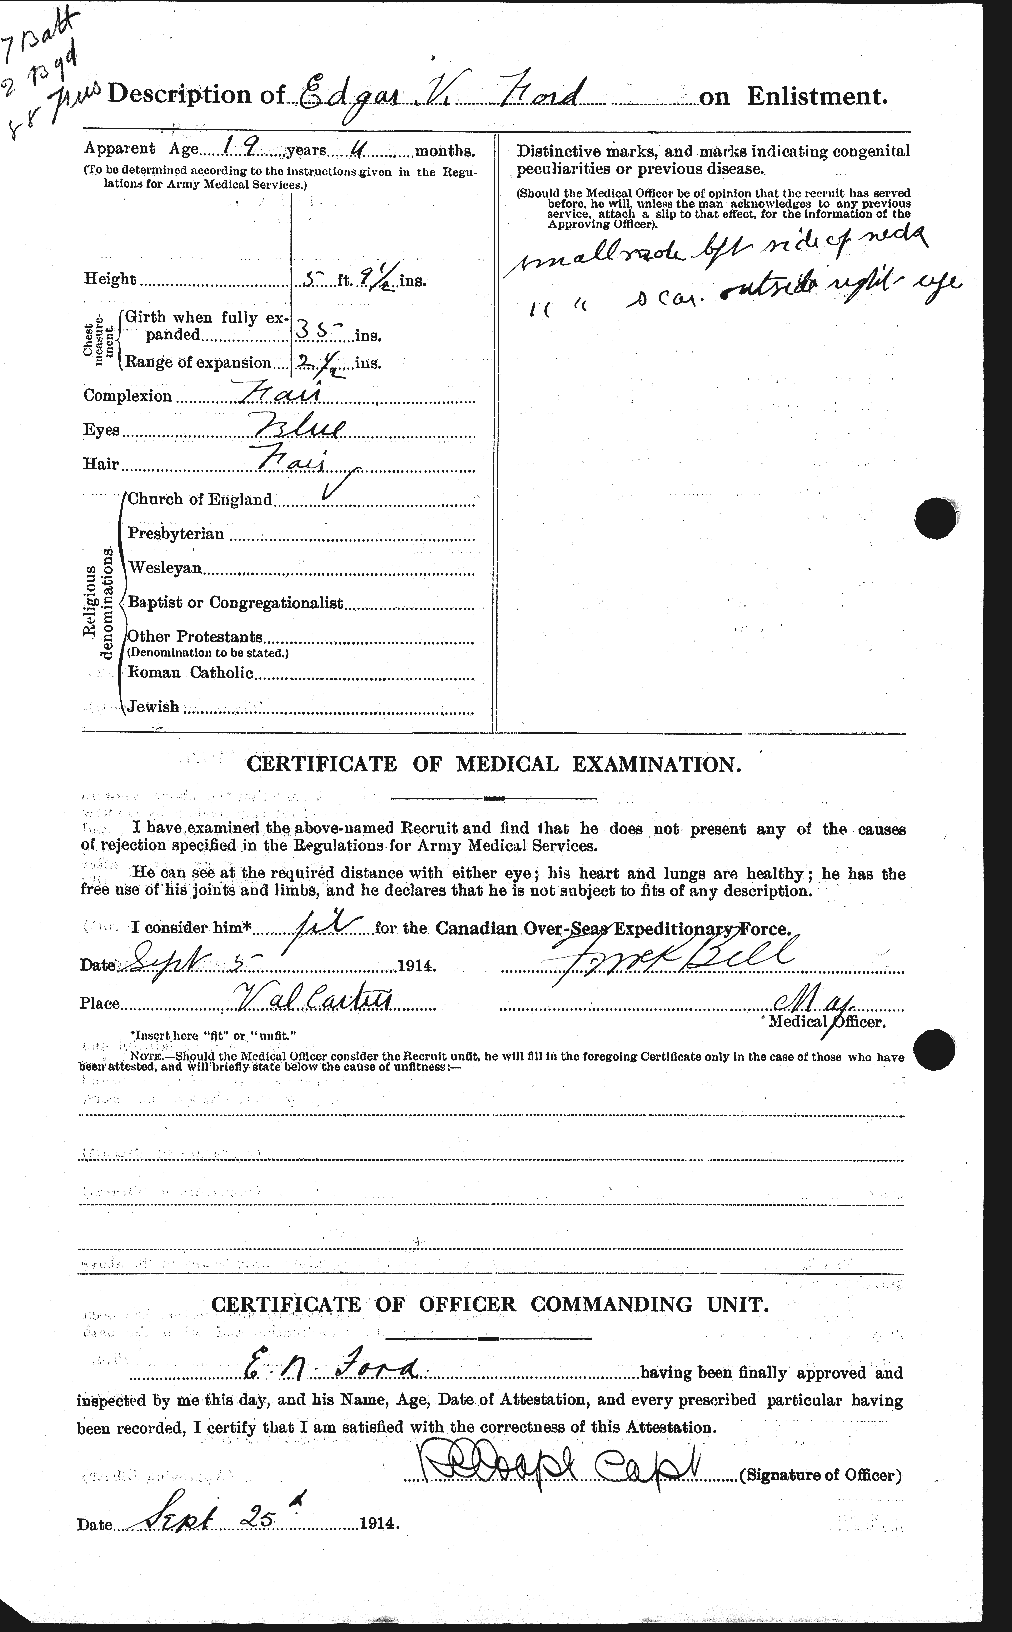 Personnel Records of the First World War - CEF 329182b